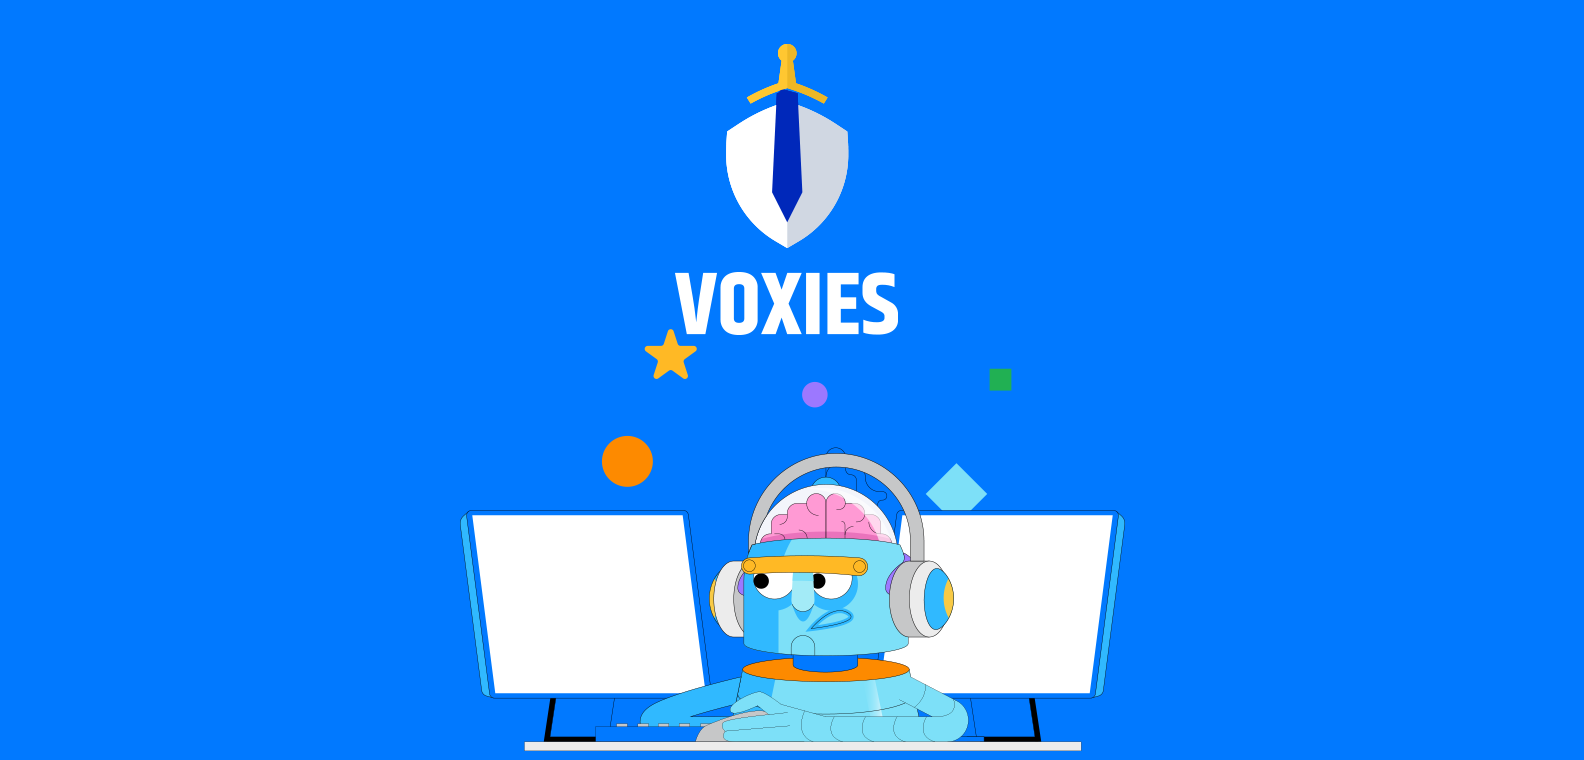 What Are Voxies And Voxie Tactics?